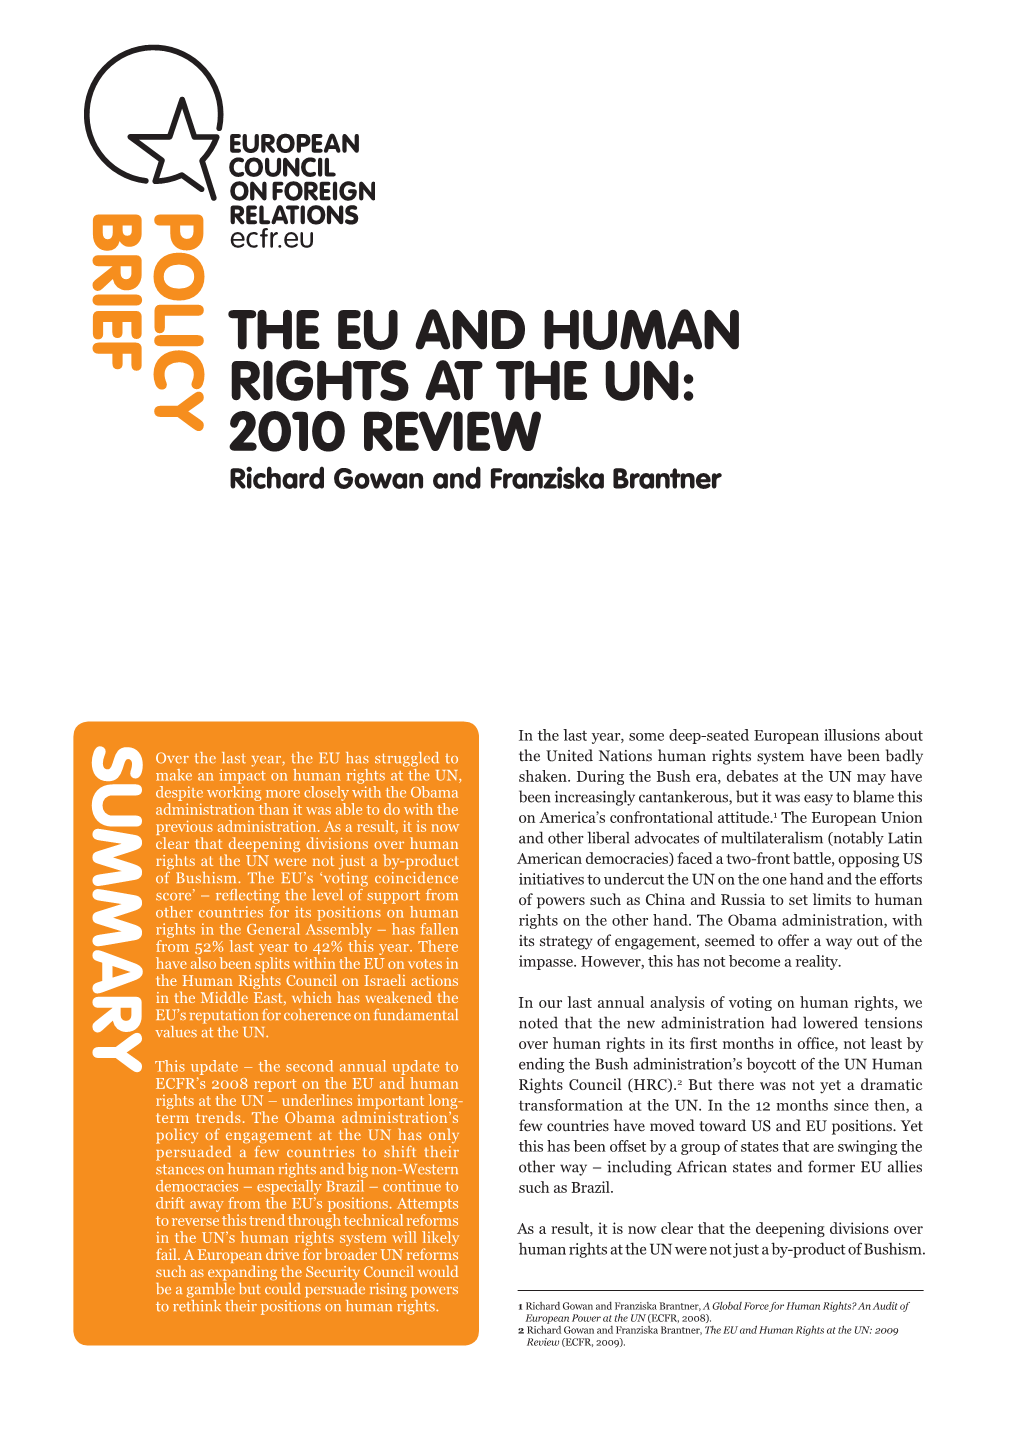 The EU and Human Rights at the UN: 2010 Review Richard Gowan and Franziska Brantner